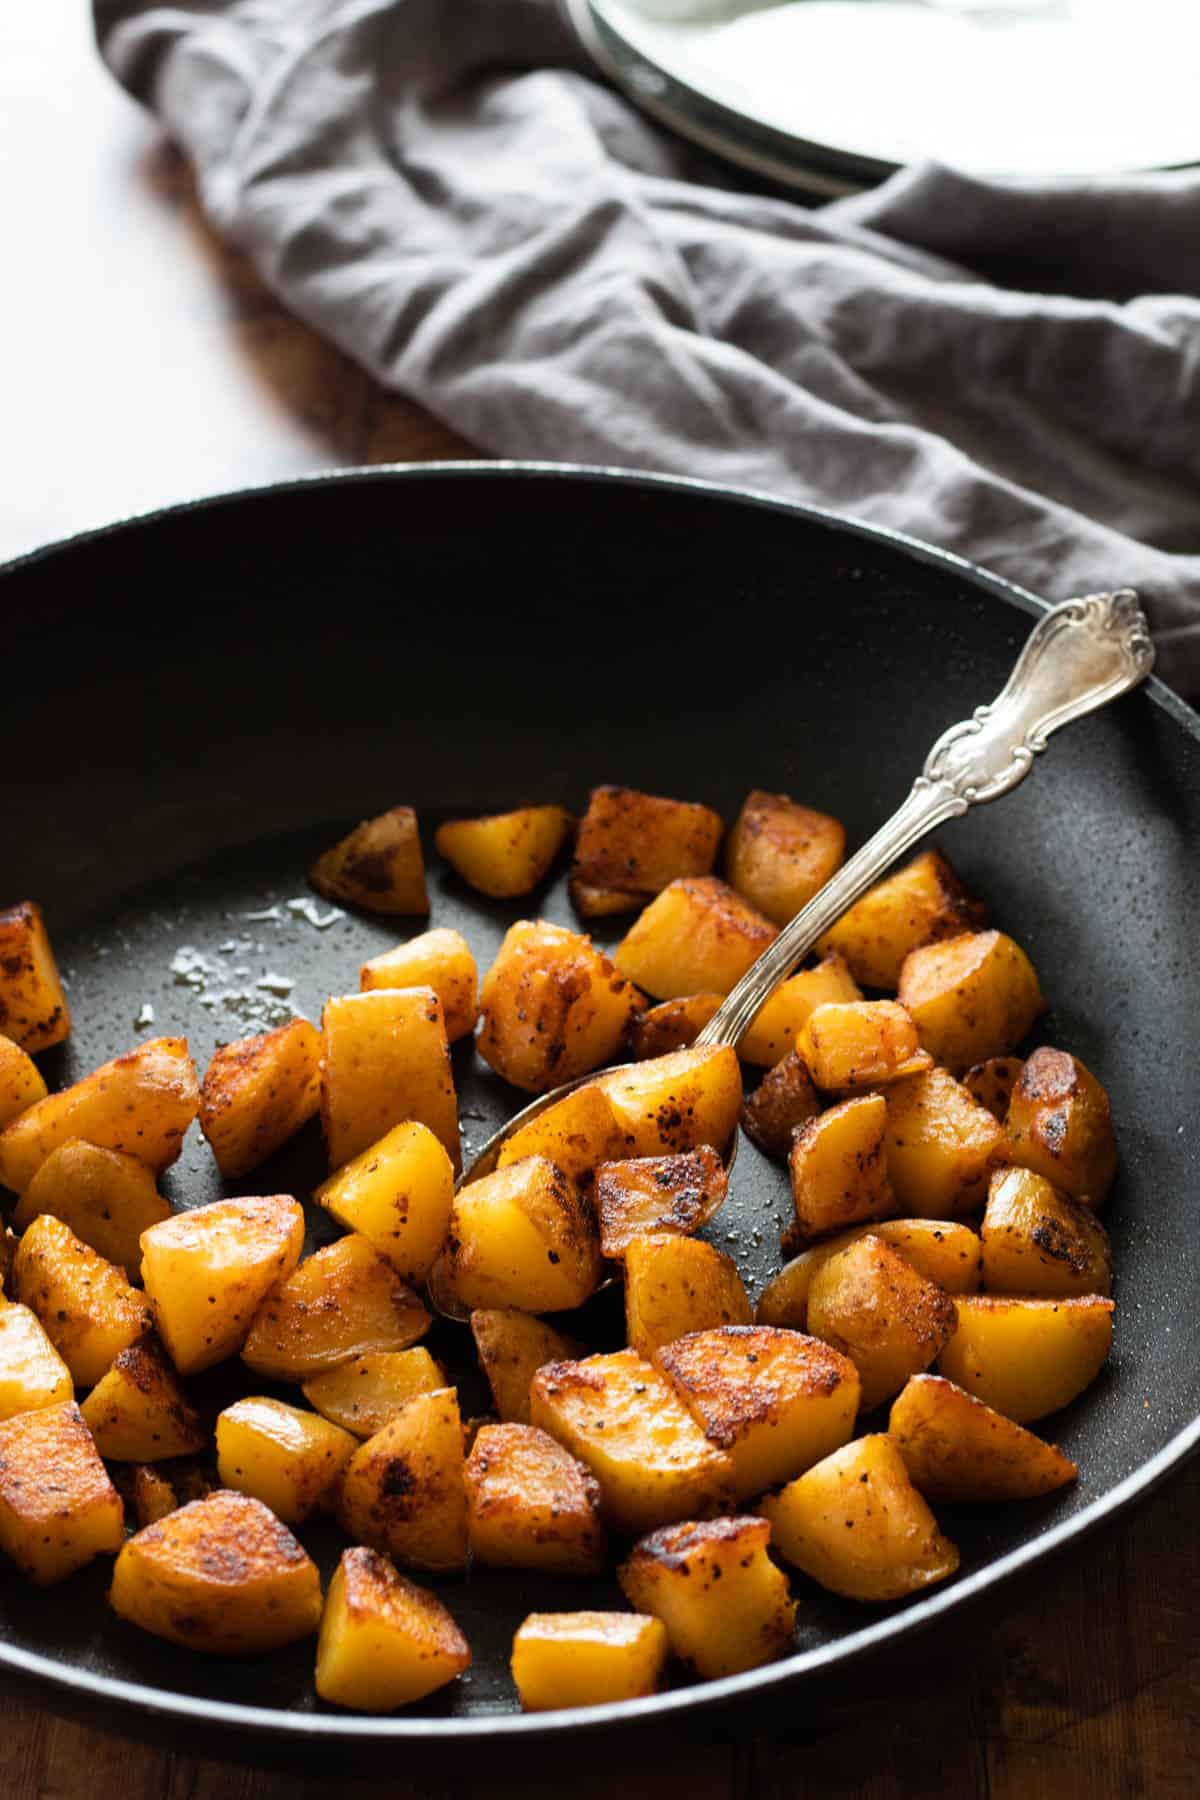 Country potatoes in a skillet.